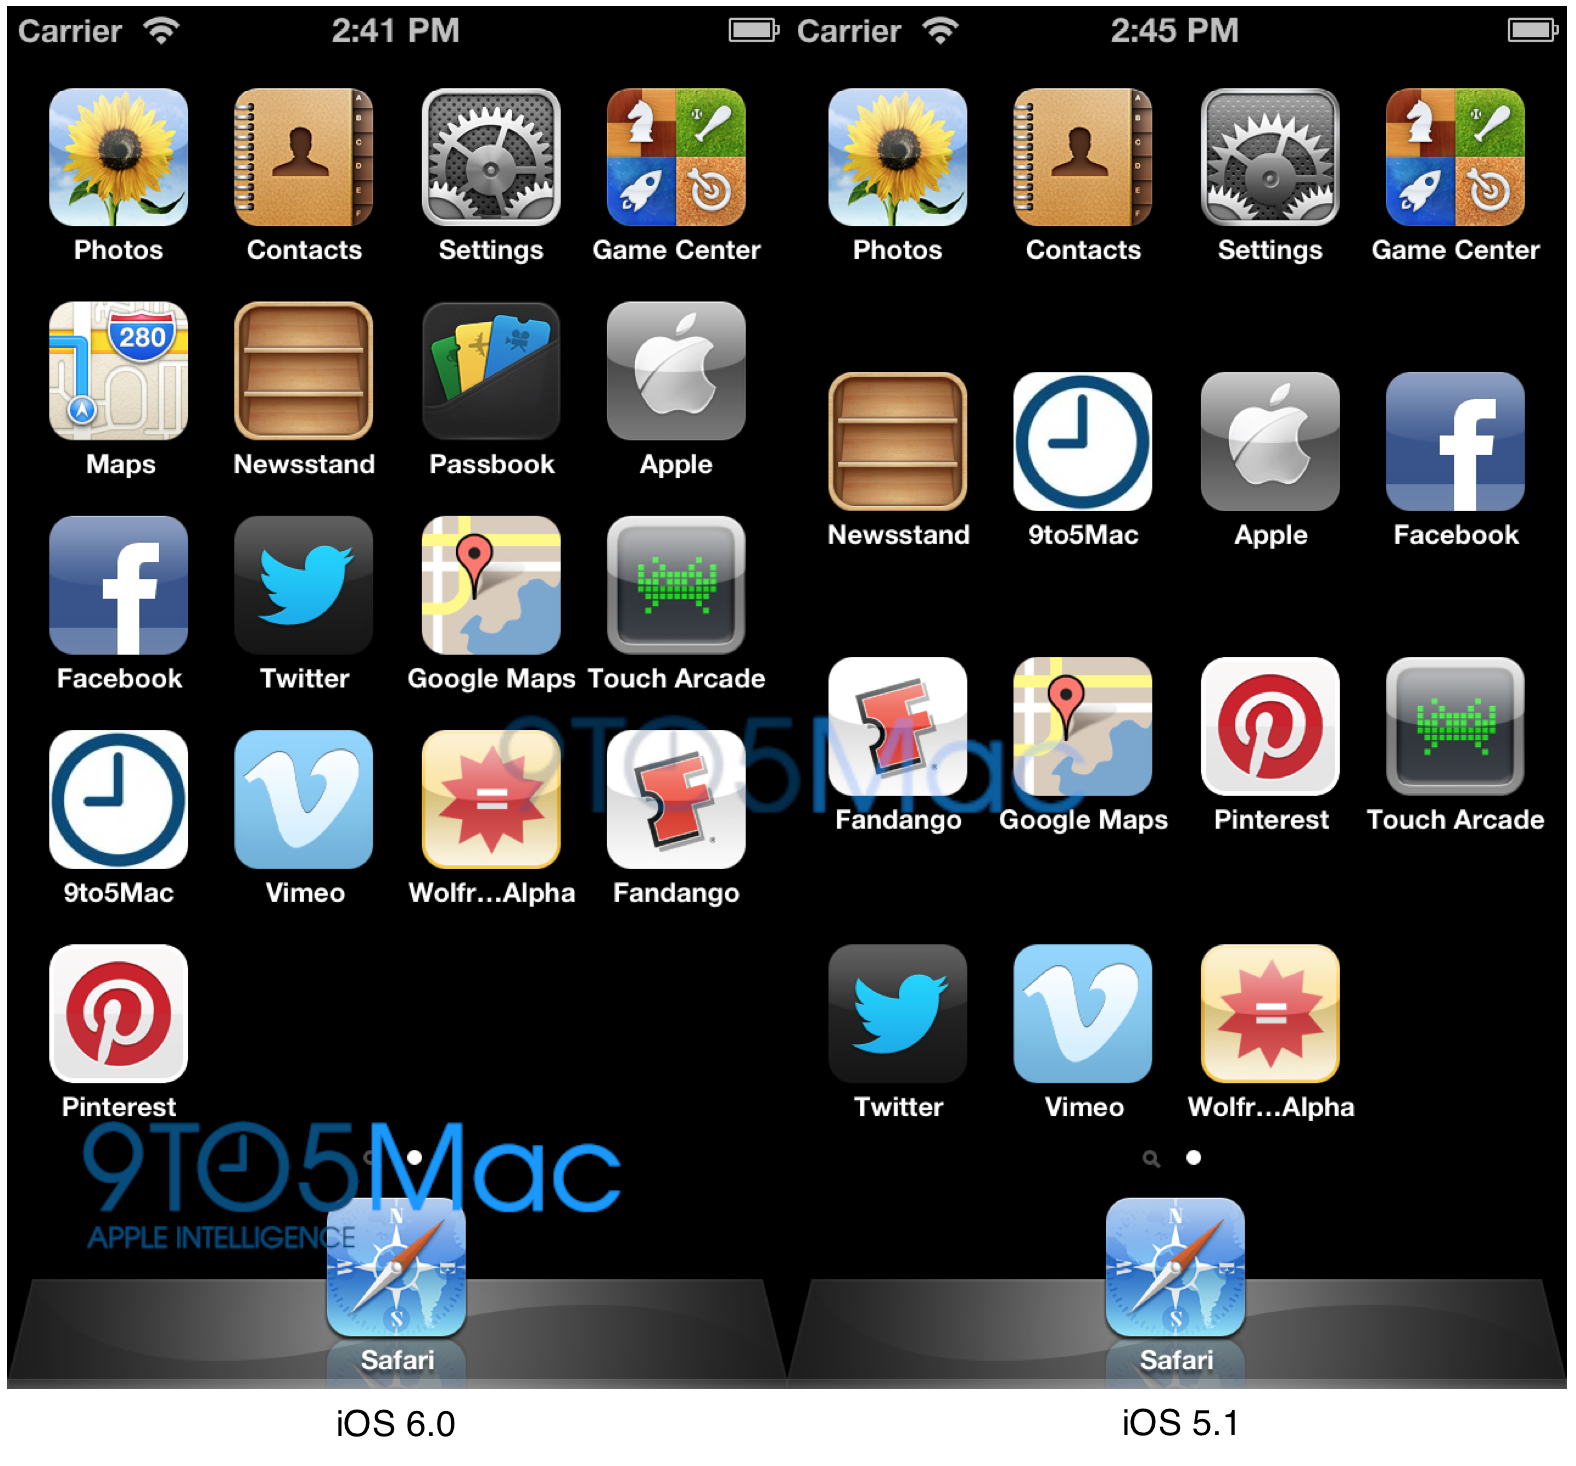 Upcoming iOS 6 is scalable to taller, 640 x 1136 iPhone display, shows